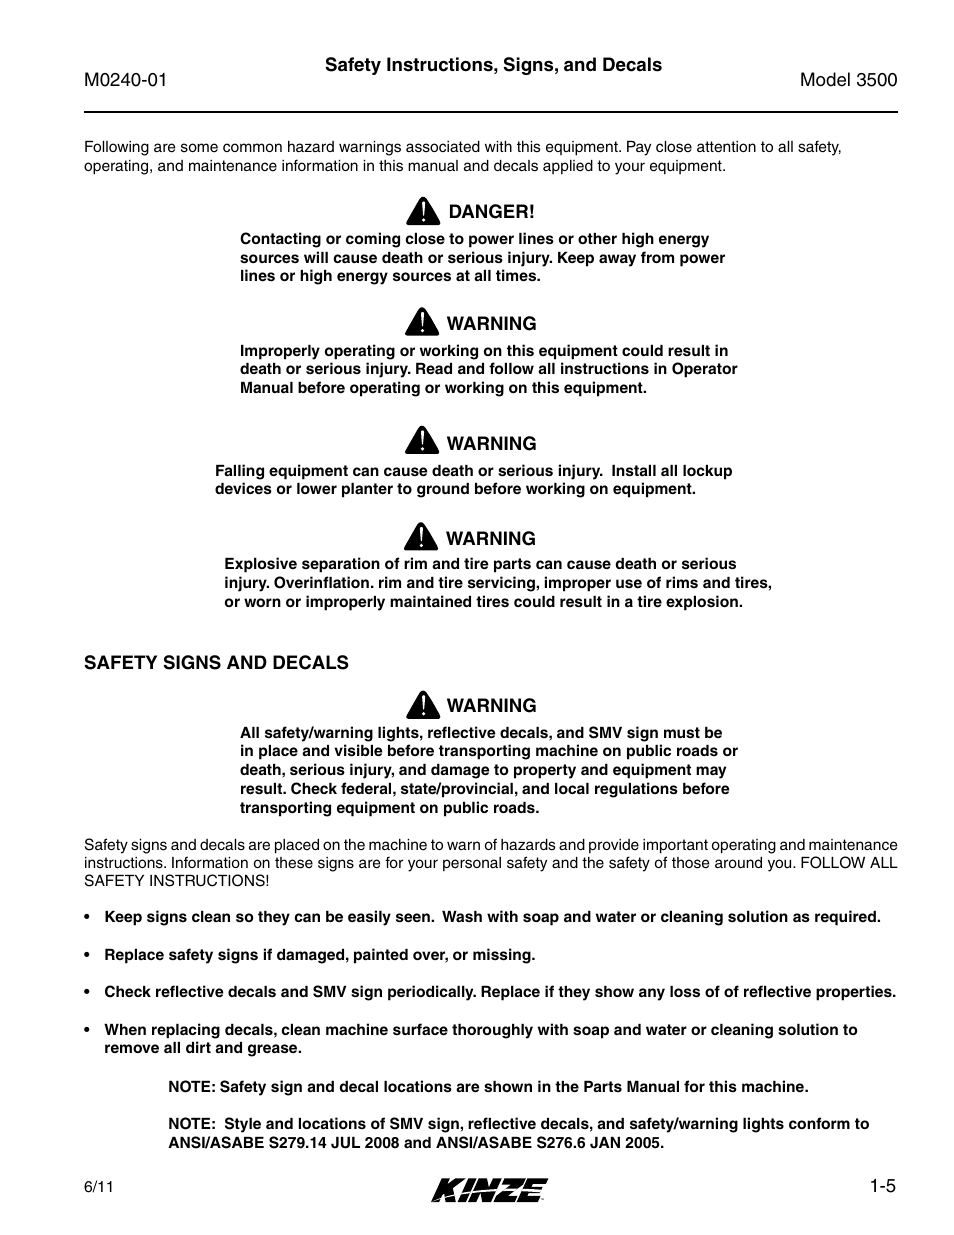 Safety instructions, signs, and decals, Safety instructions, signs, and decals -5 | Kinze 3500 Lift and Rotate Planter Rev. 7/14 User Manual | Page 11 / 140